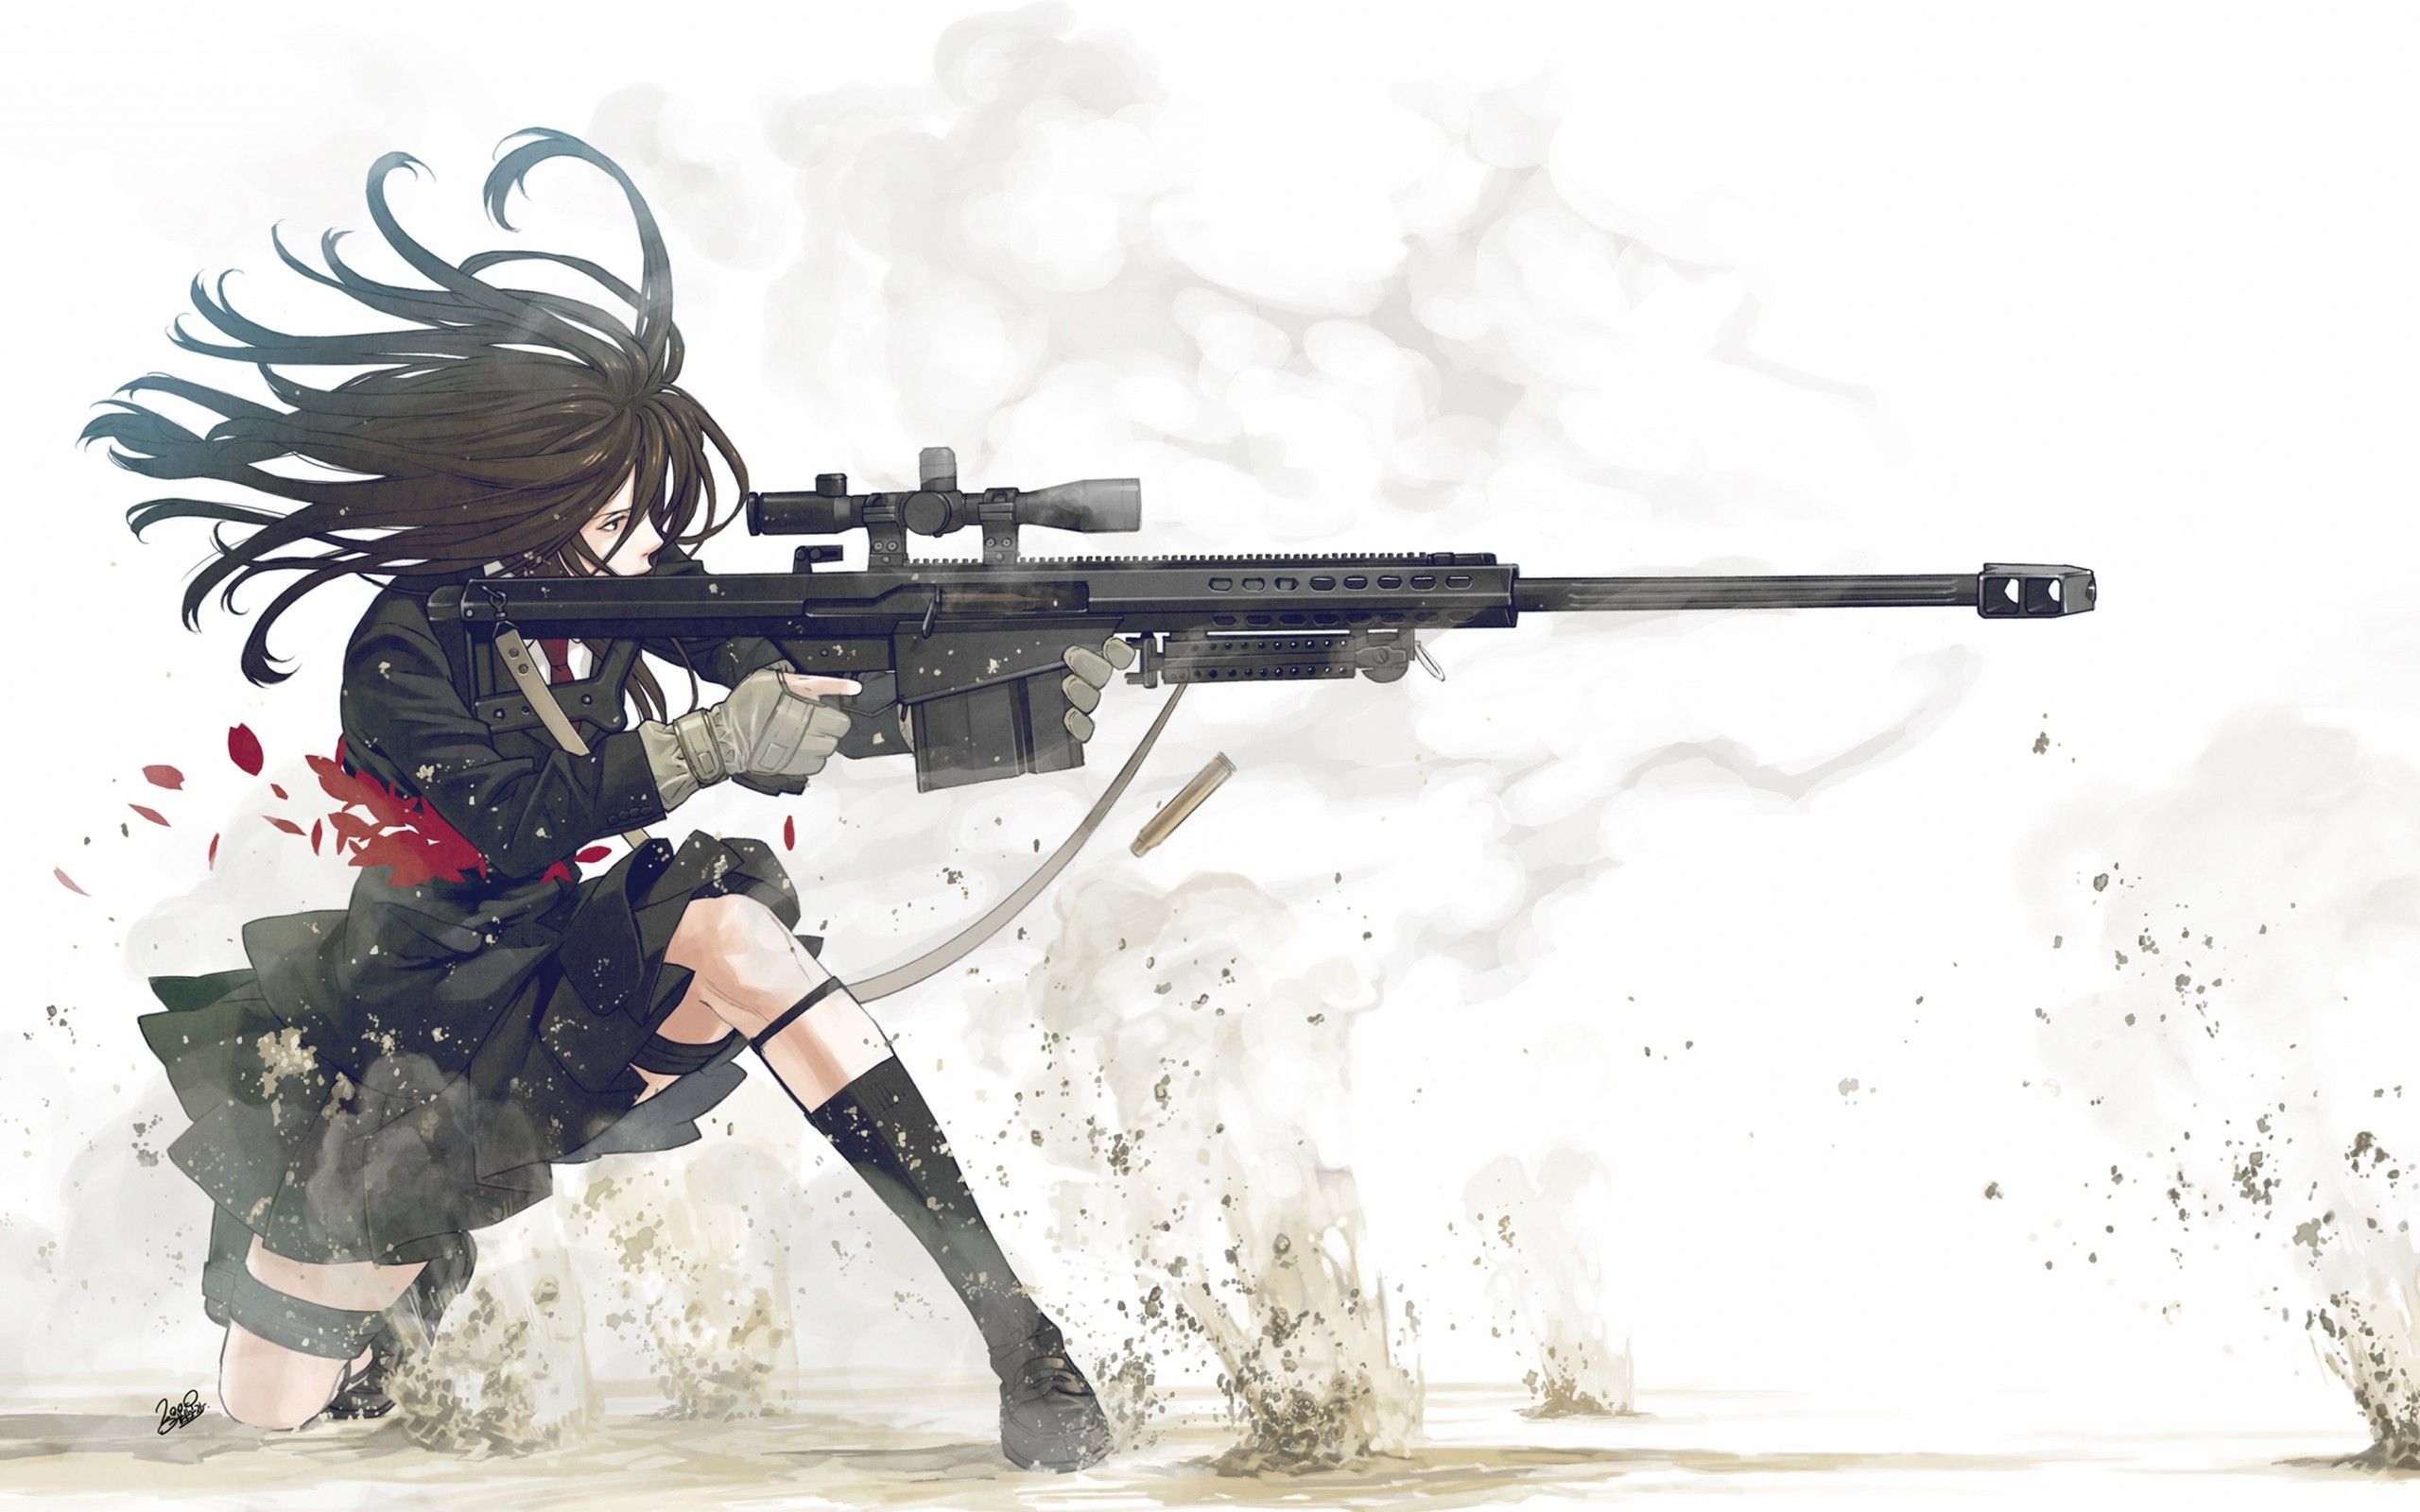 Download 2560x1600 Anime Sniper Girl, Profile View, Bullets Wallpaper for MacBook Pro 13 inch